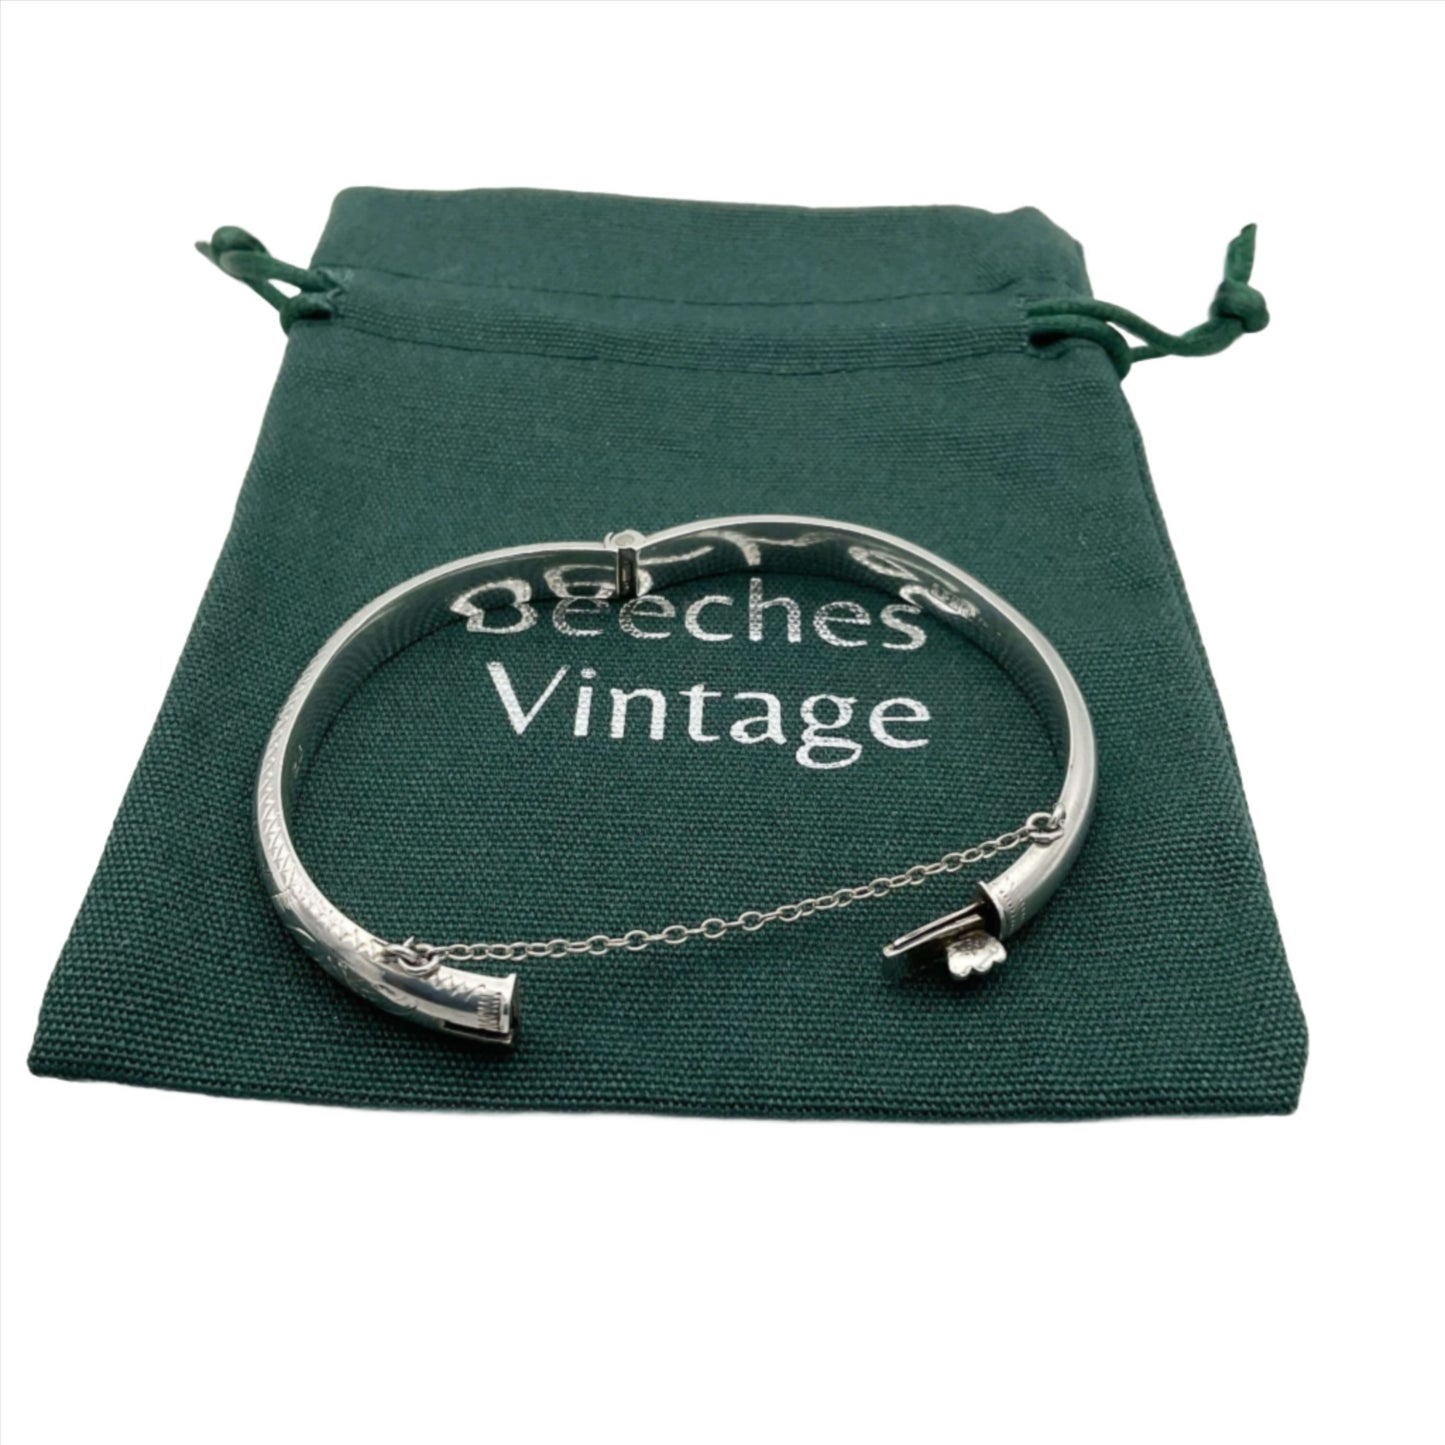 Silver bracelet with etched pattern open showing safety chain on a green bag